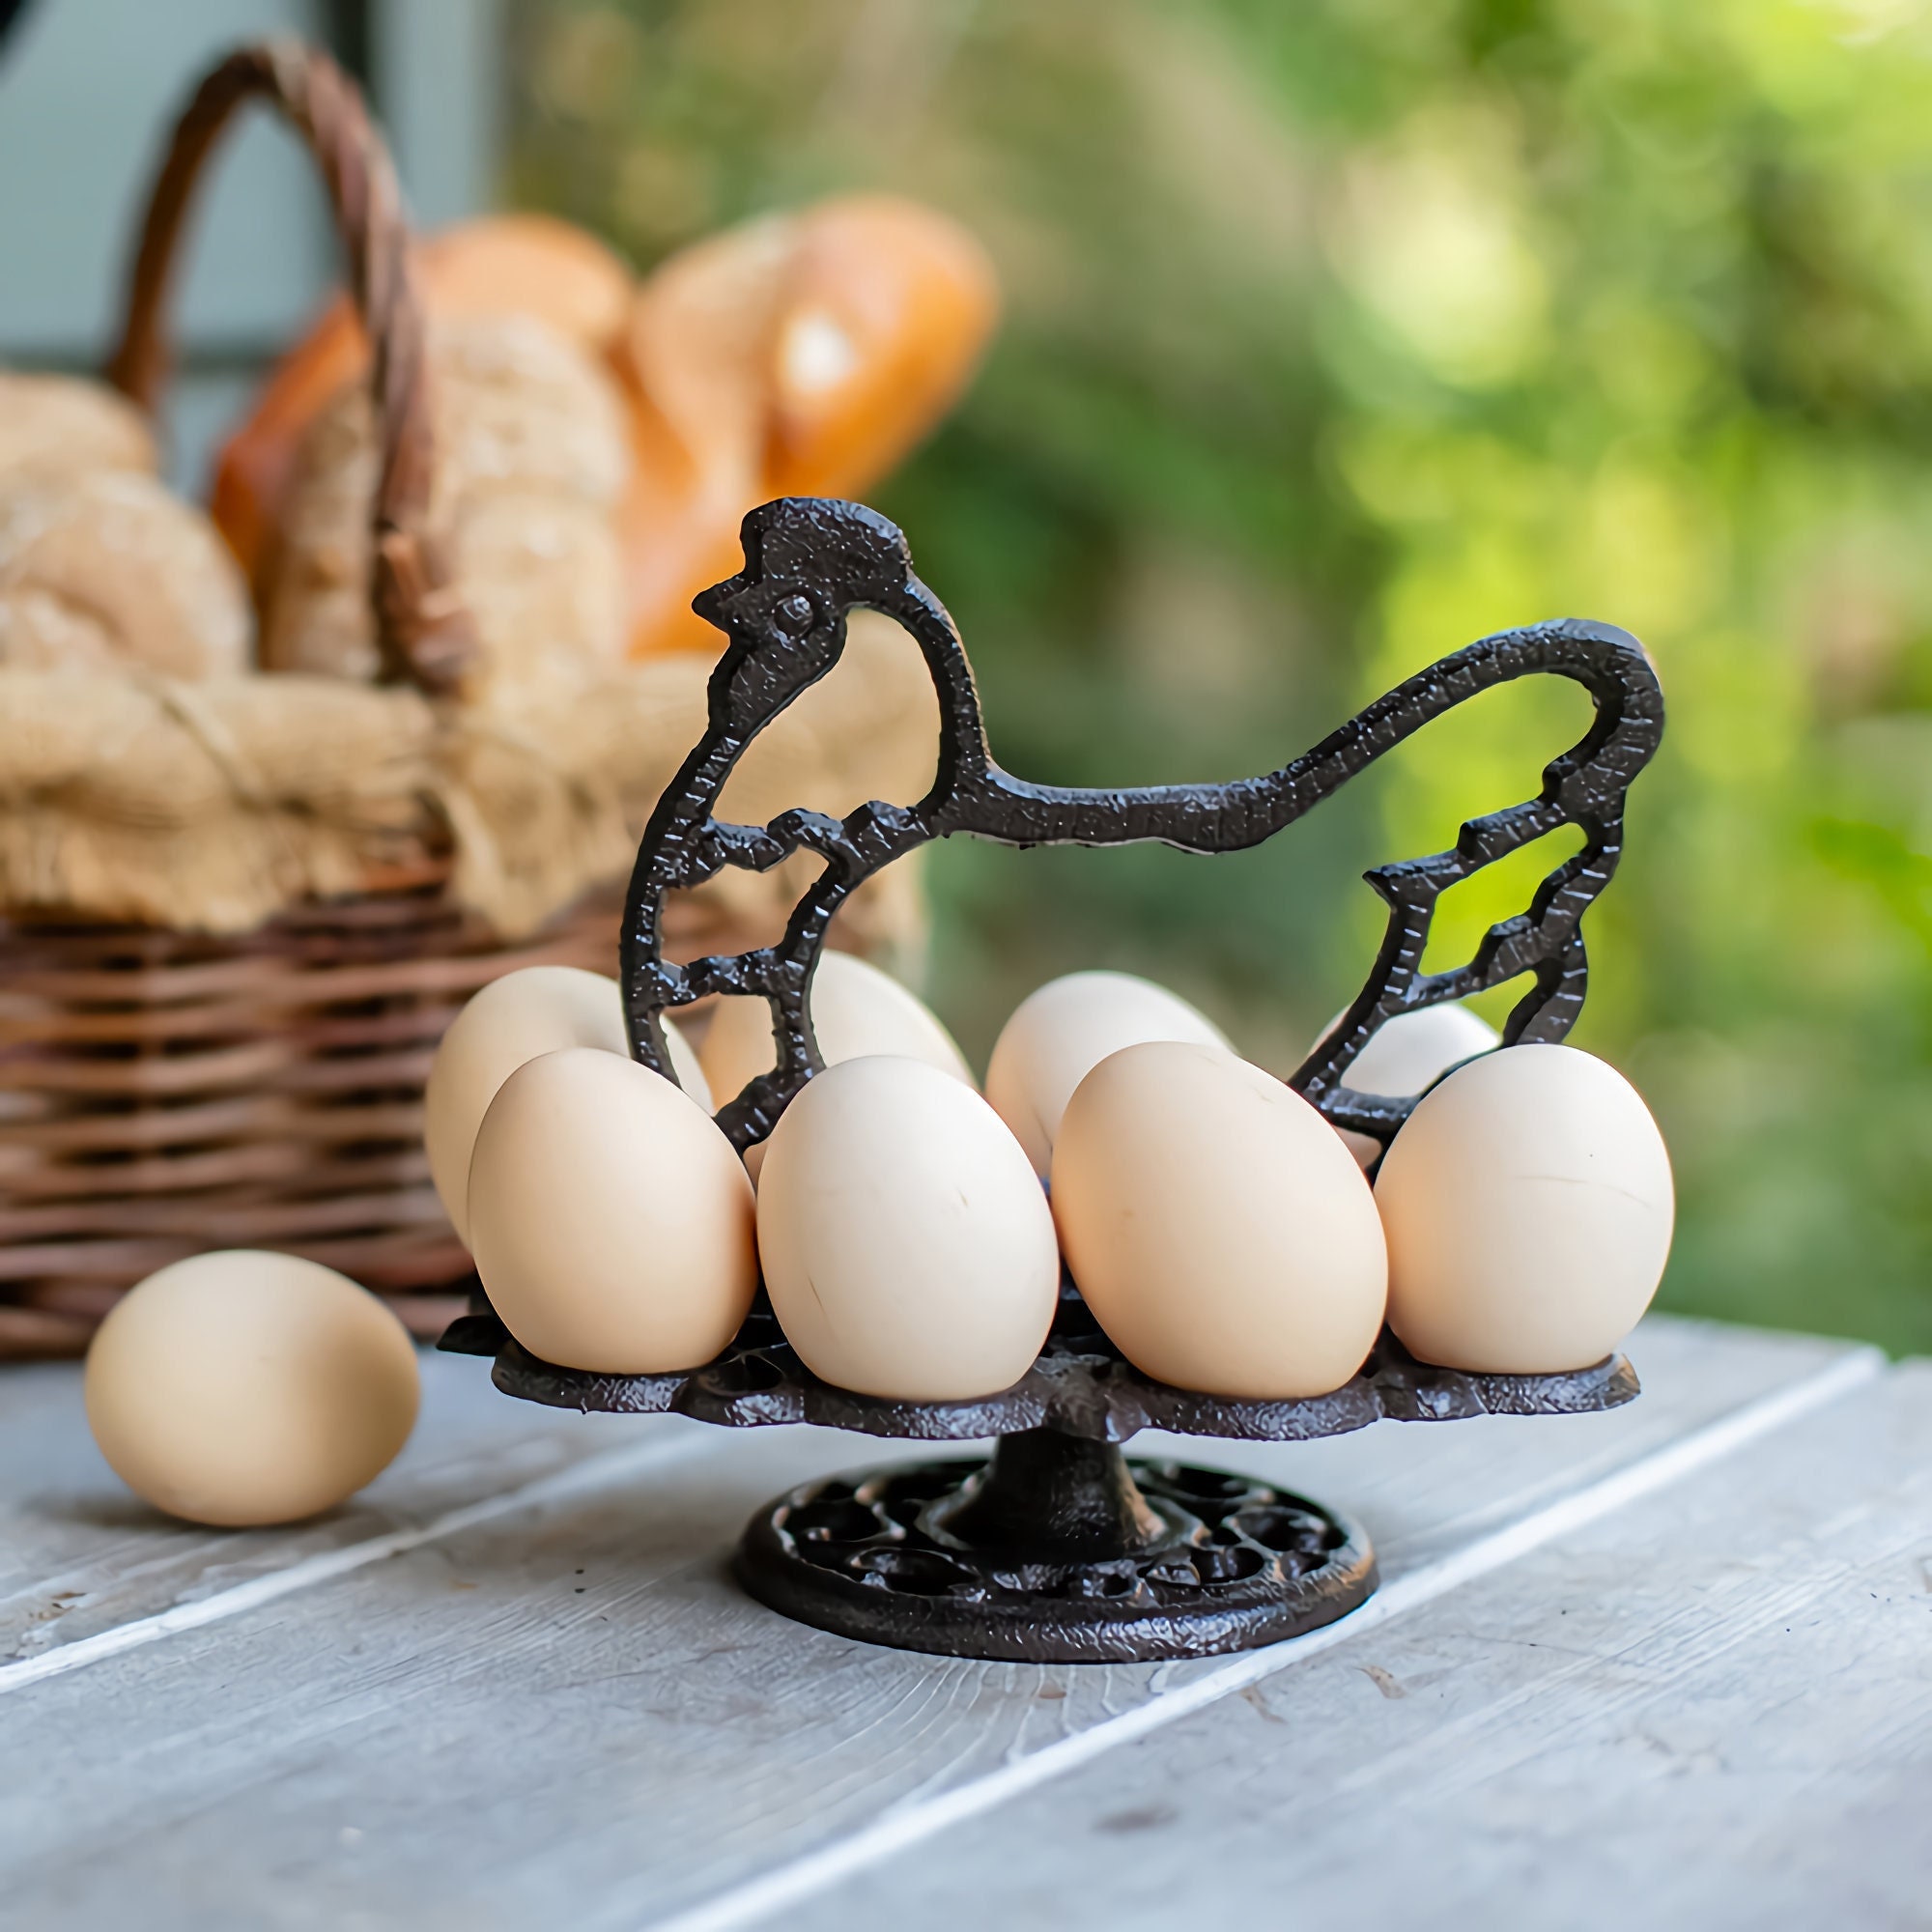 Bamboo Egg Holder Countertop - Stackable Design for 36 Eggs | Farm Fresh  Egg Organizer Display Stand | Wooden Chicken Egg Storage Kitchen Counter  Top